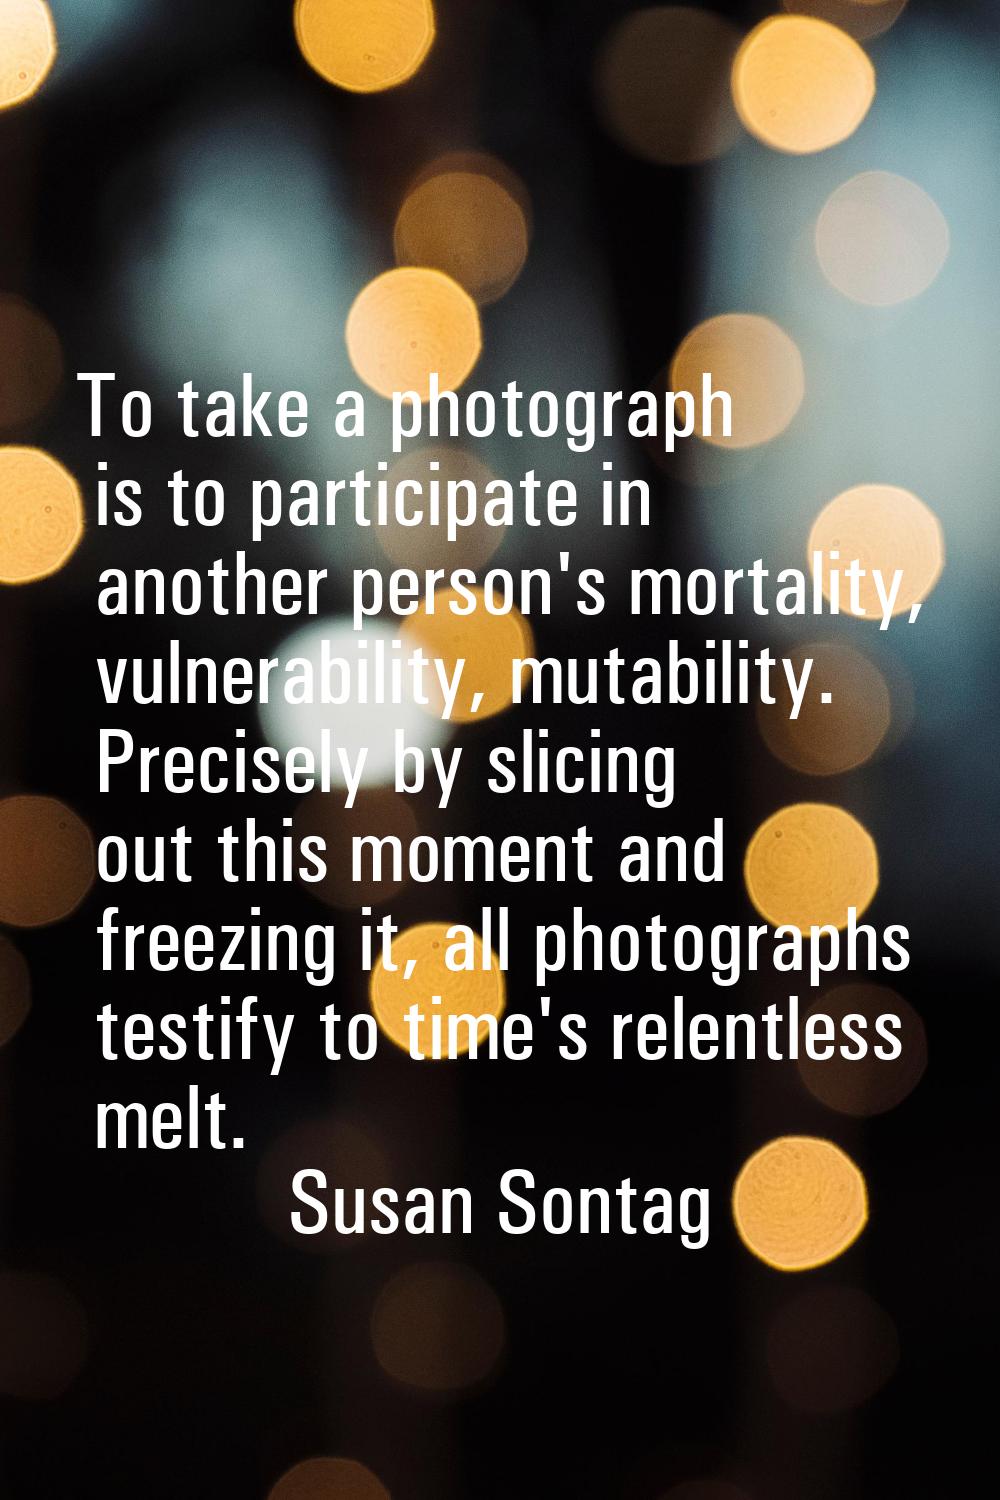 To take a photograph is to participate in another person's mortality, vulnerability, mutability. Pr